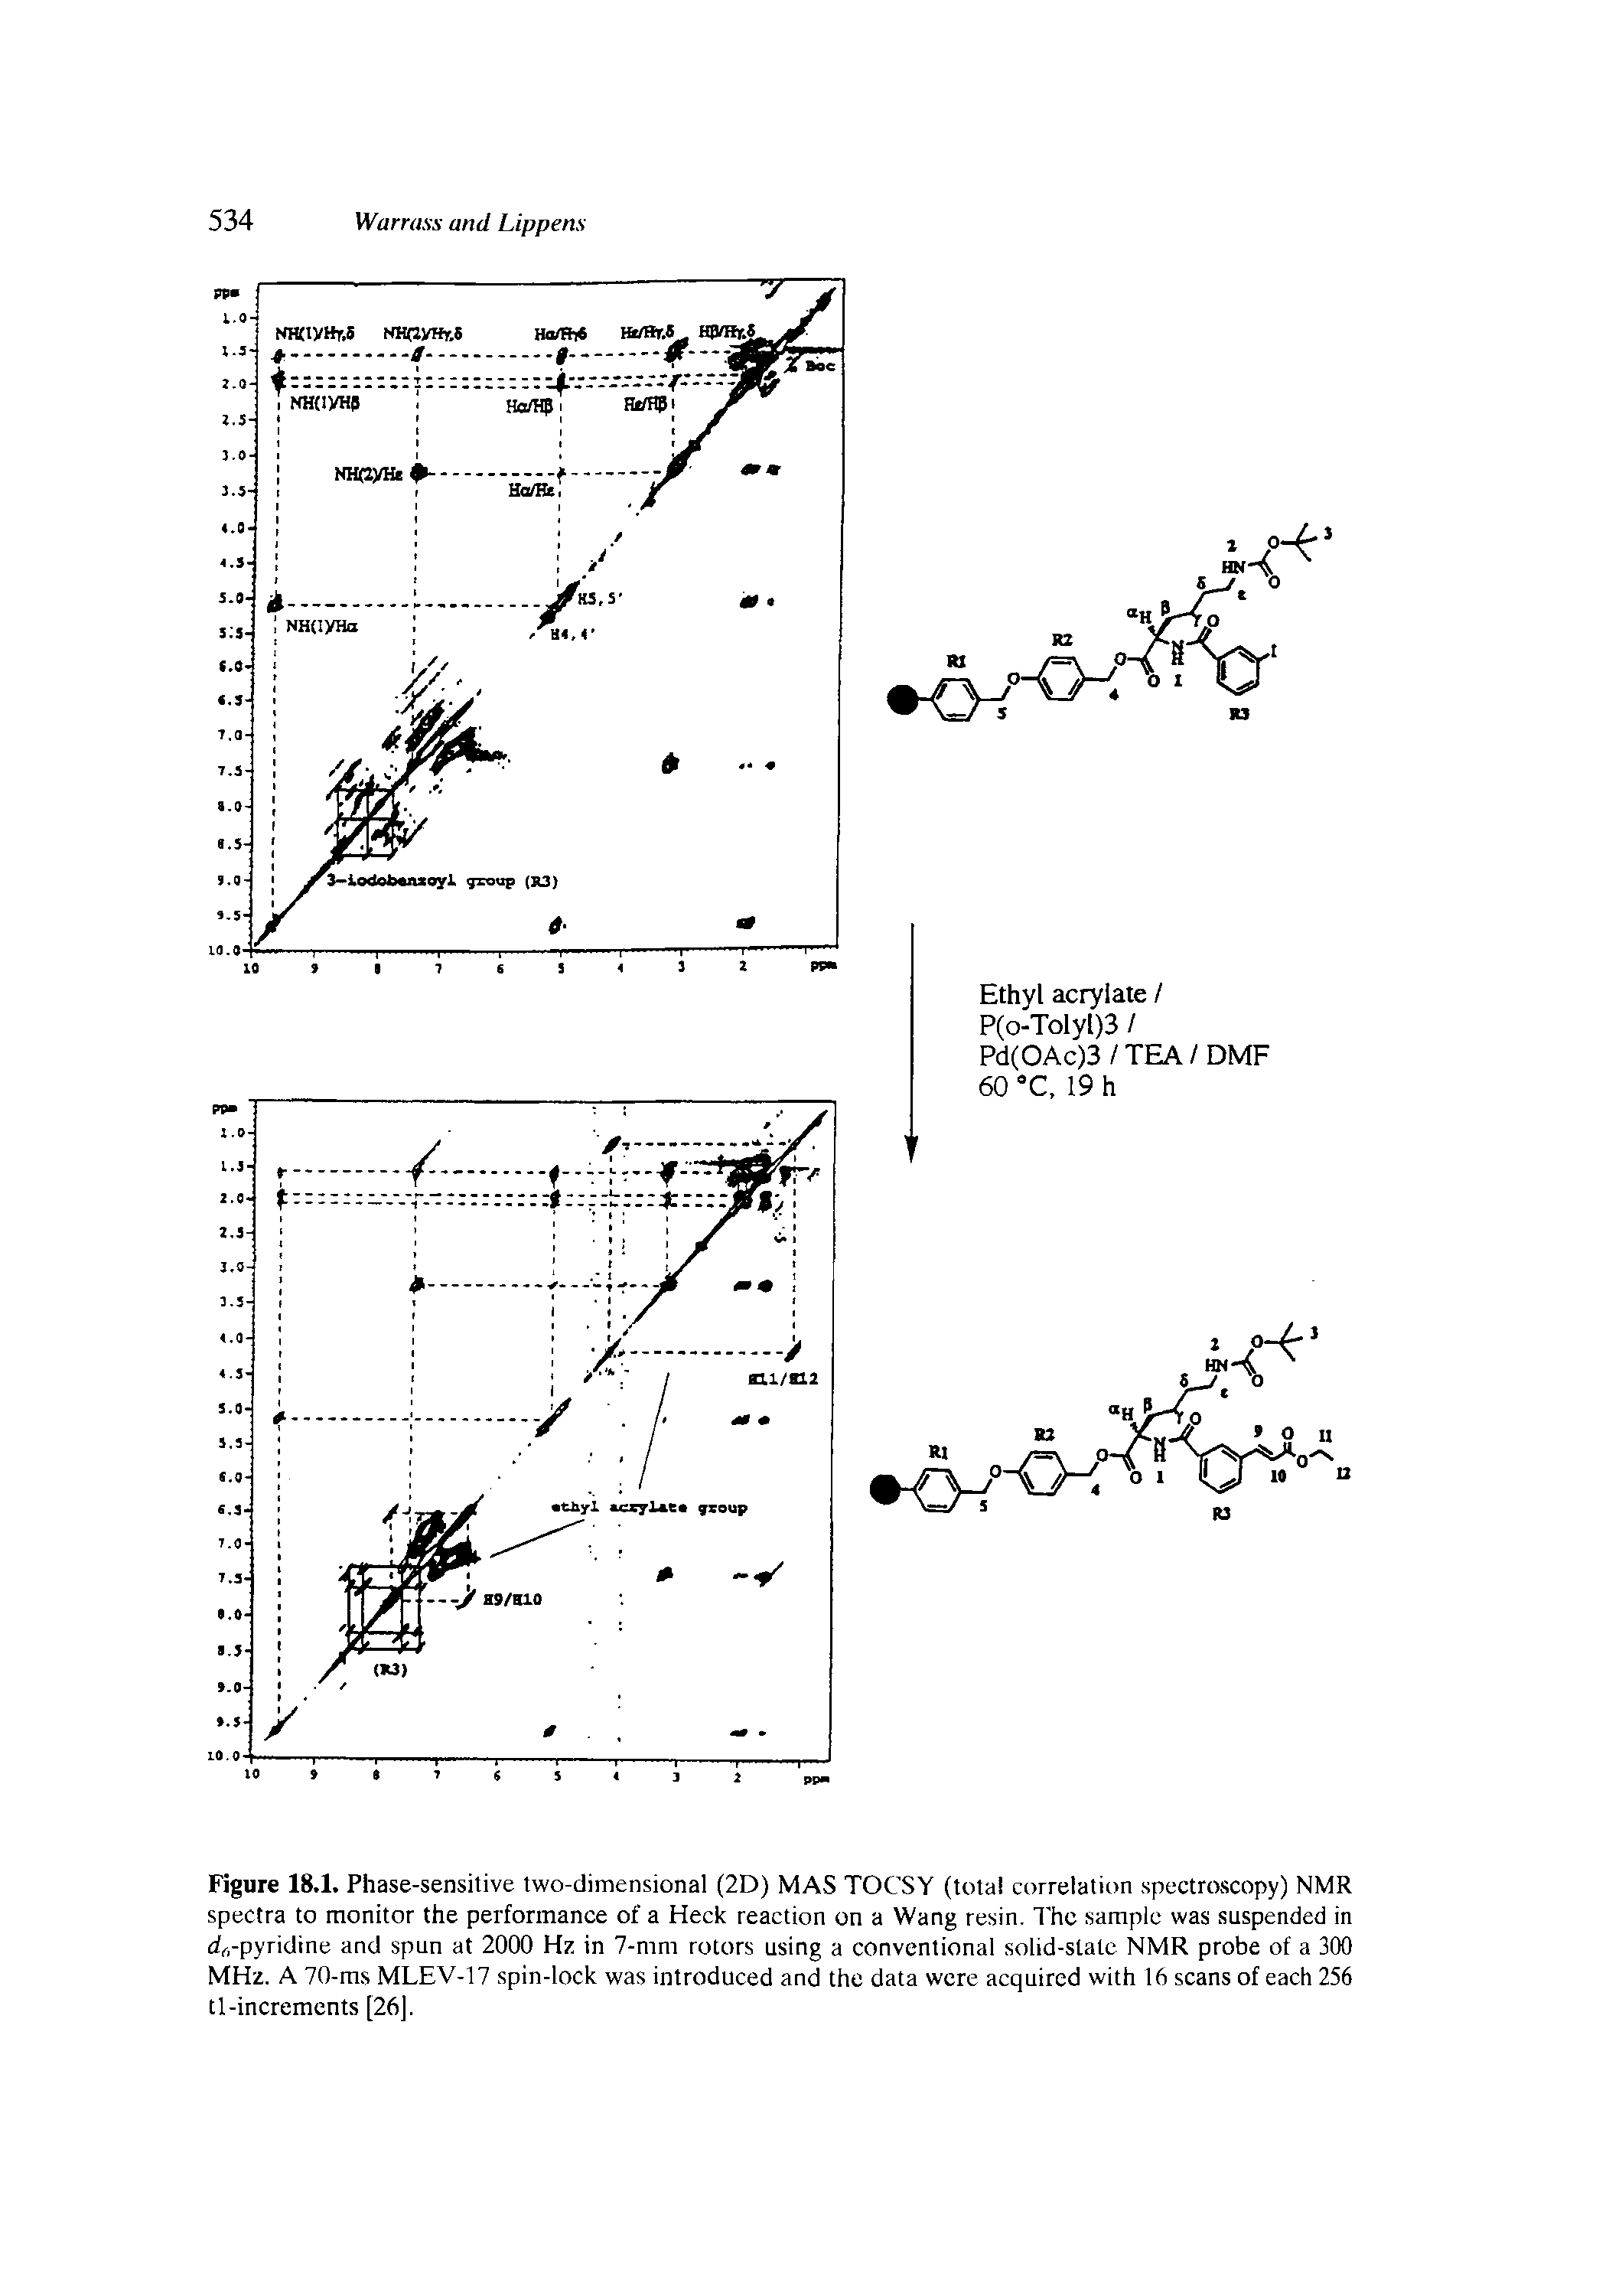 Figure 18.1. Phase-sensitive two-dimensional (2D) MAS TOCSY (total correlation spectroscopy) NMR spectra to monitor the performance of a Heck reaction on a Wang resin. The sample was suspended in 4 -pyridine and spun at 2000 Hz in 7-mm rotors using a conventional solid-state NMR probe of a 300 MHz. A 70-ms MLEV-17 spin-lock was introduced and the data were acquired with 16 scans of each 256 tl-increments [26],...